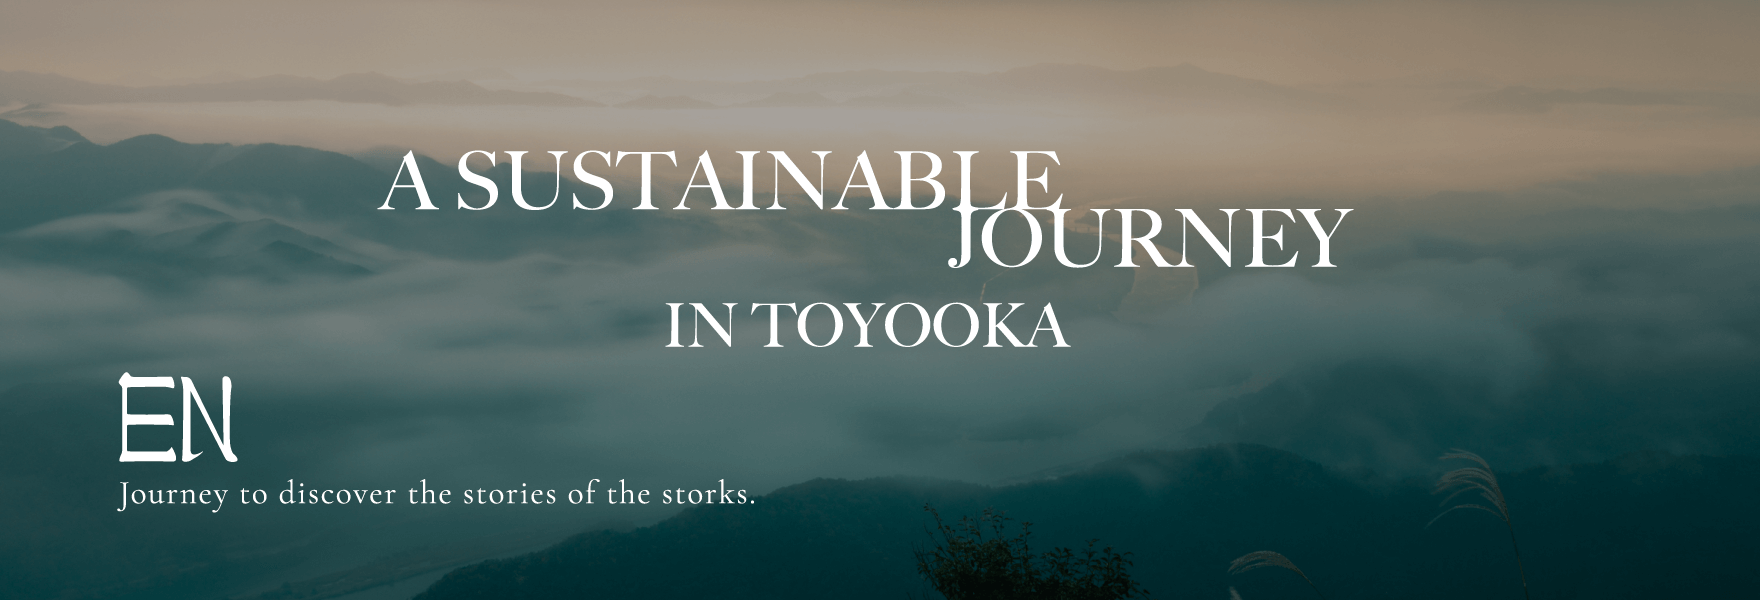 A SUSTAINABLE JOURNEY IN TOYOOKA